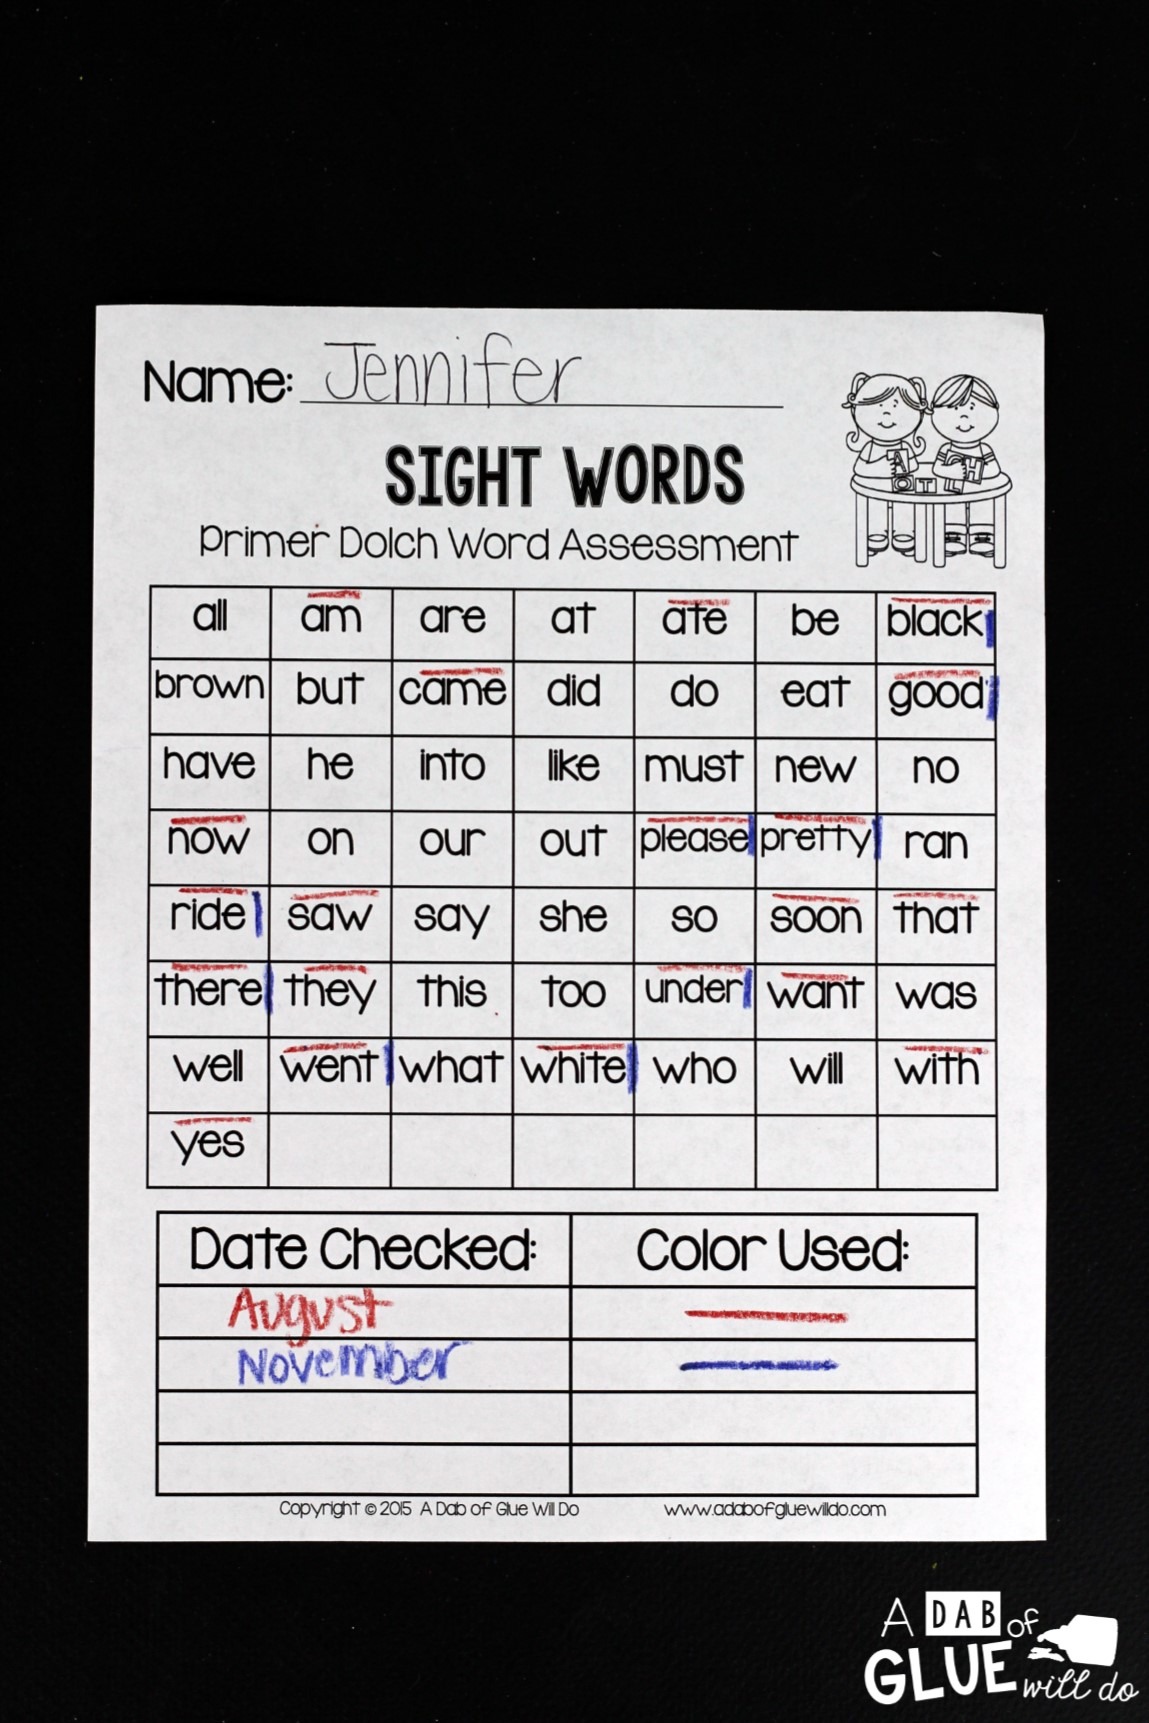 Engage your class in Dolch Primer {Brights} sight word activities, literacy centers, and word wall! This unit is perfect for literacy centers in Kindergarten, First Grade, and Second Grade classrooms and packed full of inviting student activities. Students will learn using their favorite alphabet games, Play Doh word mats, Tic-Tac-Toe, and more! This pack is great for homeschoolers with a student assessment included!